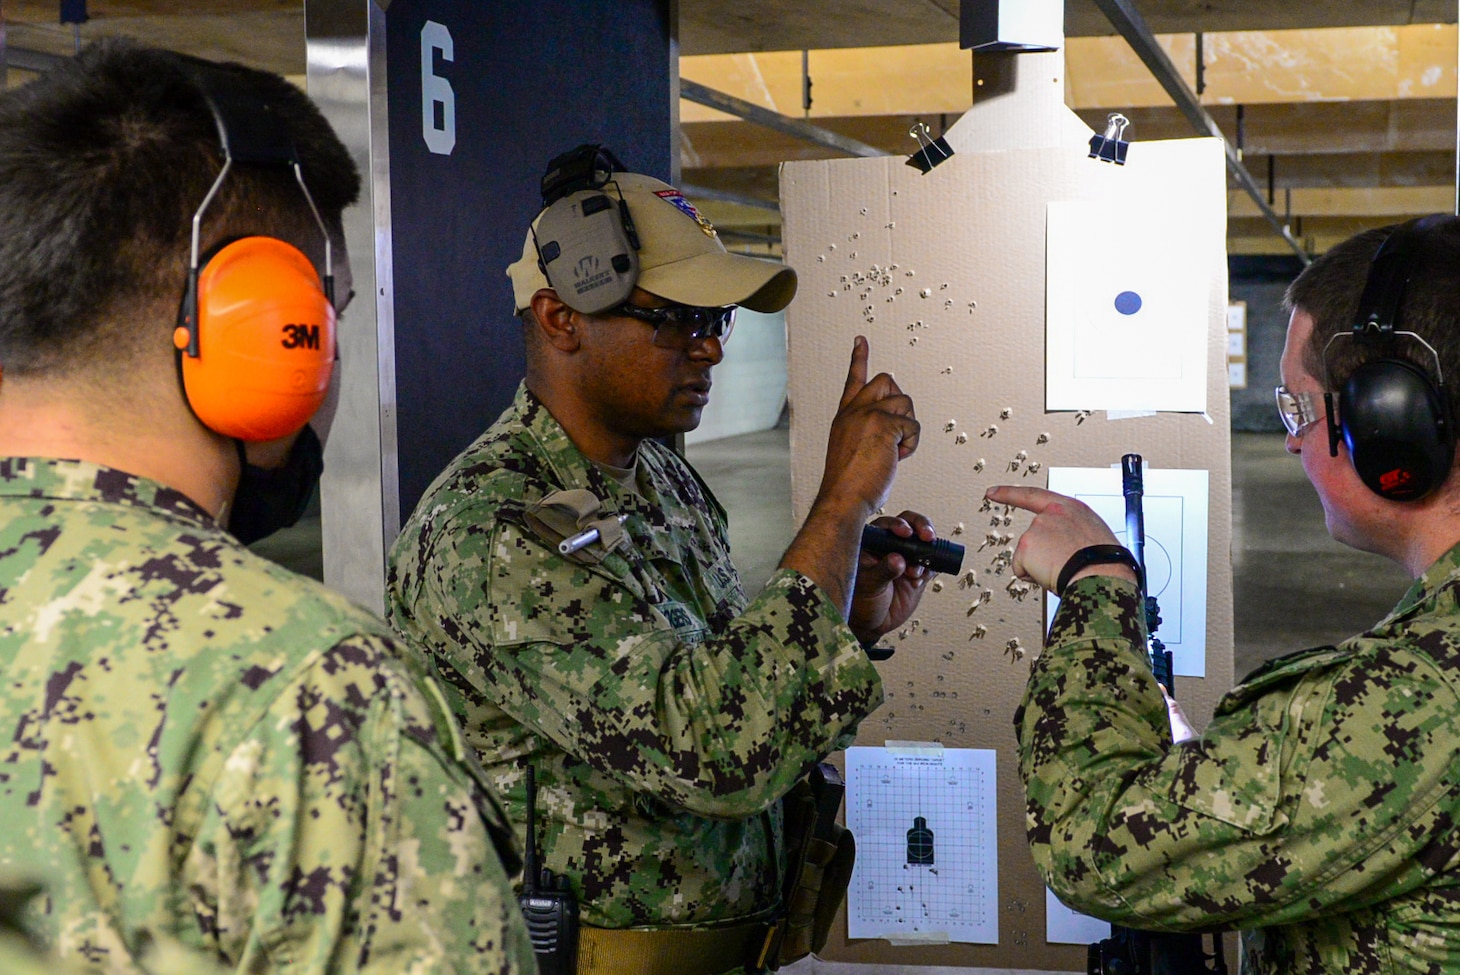 Chief Master-at-Arms Joe Rogers (center), the senior enlisted leader at Navy Reserve Naval Security Forces Fort Worth instructs Sailors during a weapons qualification exercise held at the small arms range aboard Naval Air Station Fort Worth Joint Reserve Base. The exercise is part of a Navy-wide sustainment training requirement for all Sailors designated as armed watch standers. (U.S. Navy photo by Mass Communication Specialist 1st Class Lawrence Davis)